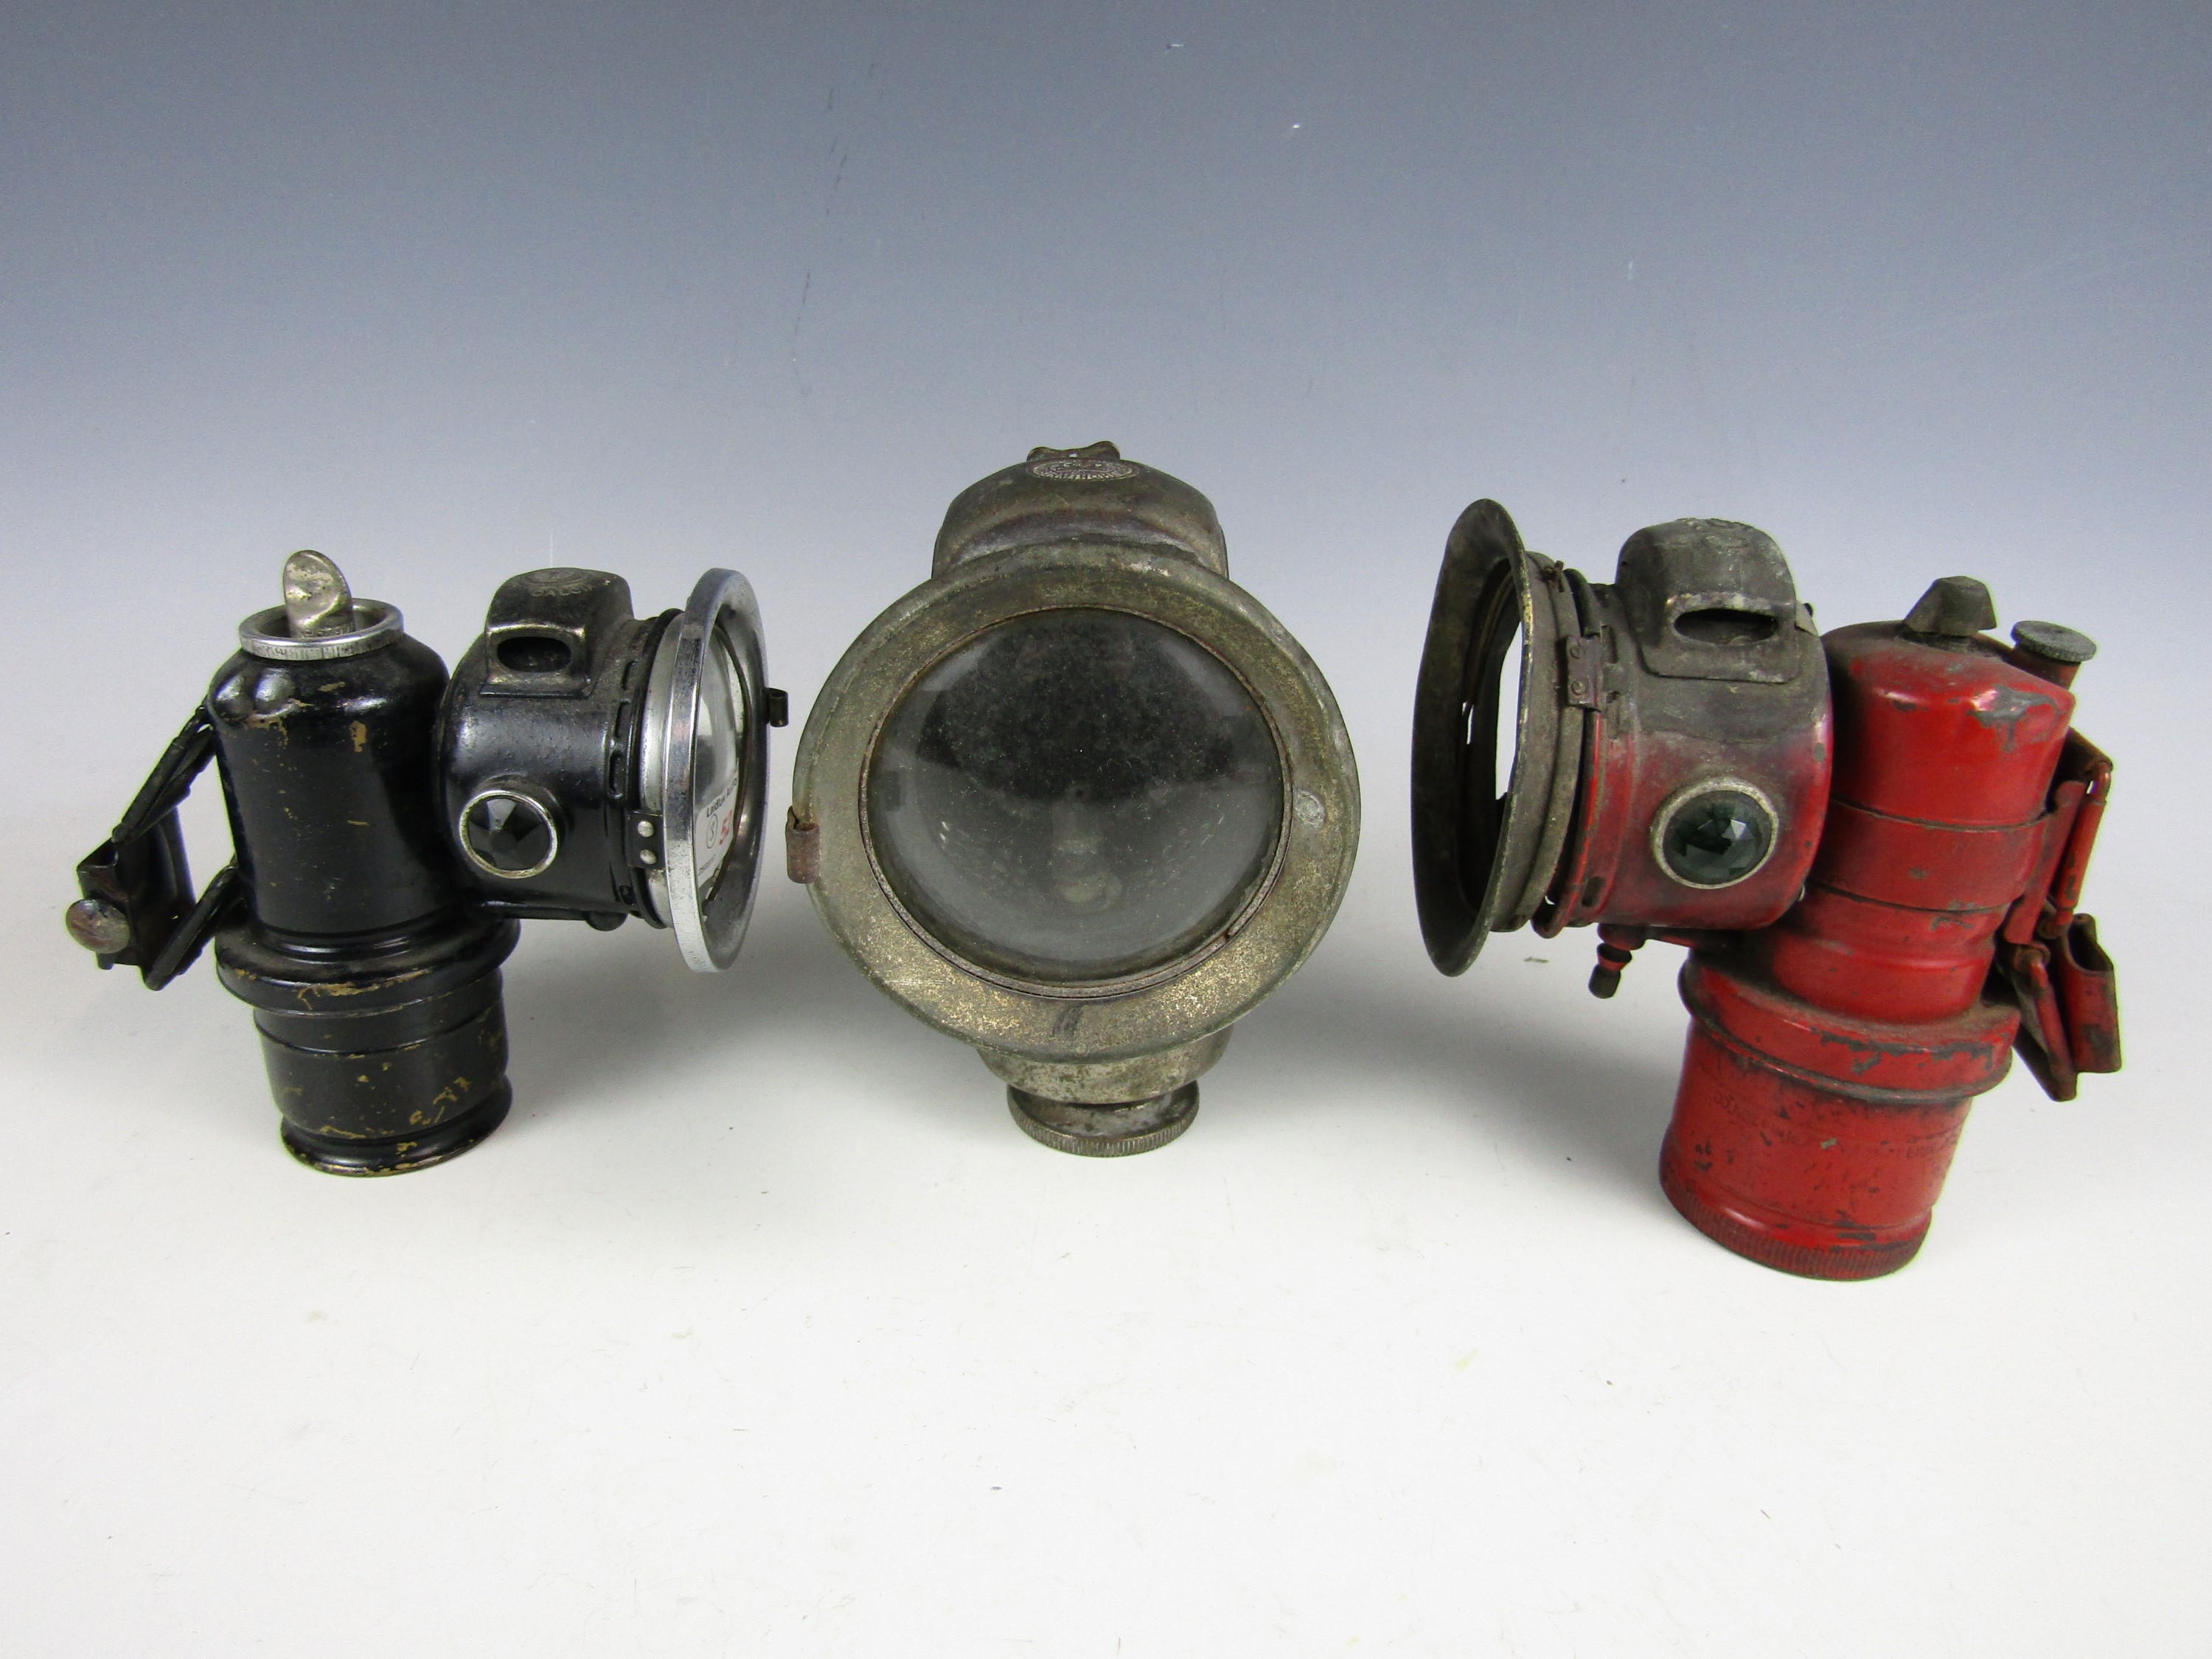 A GPO and two other vintage carbide lamps